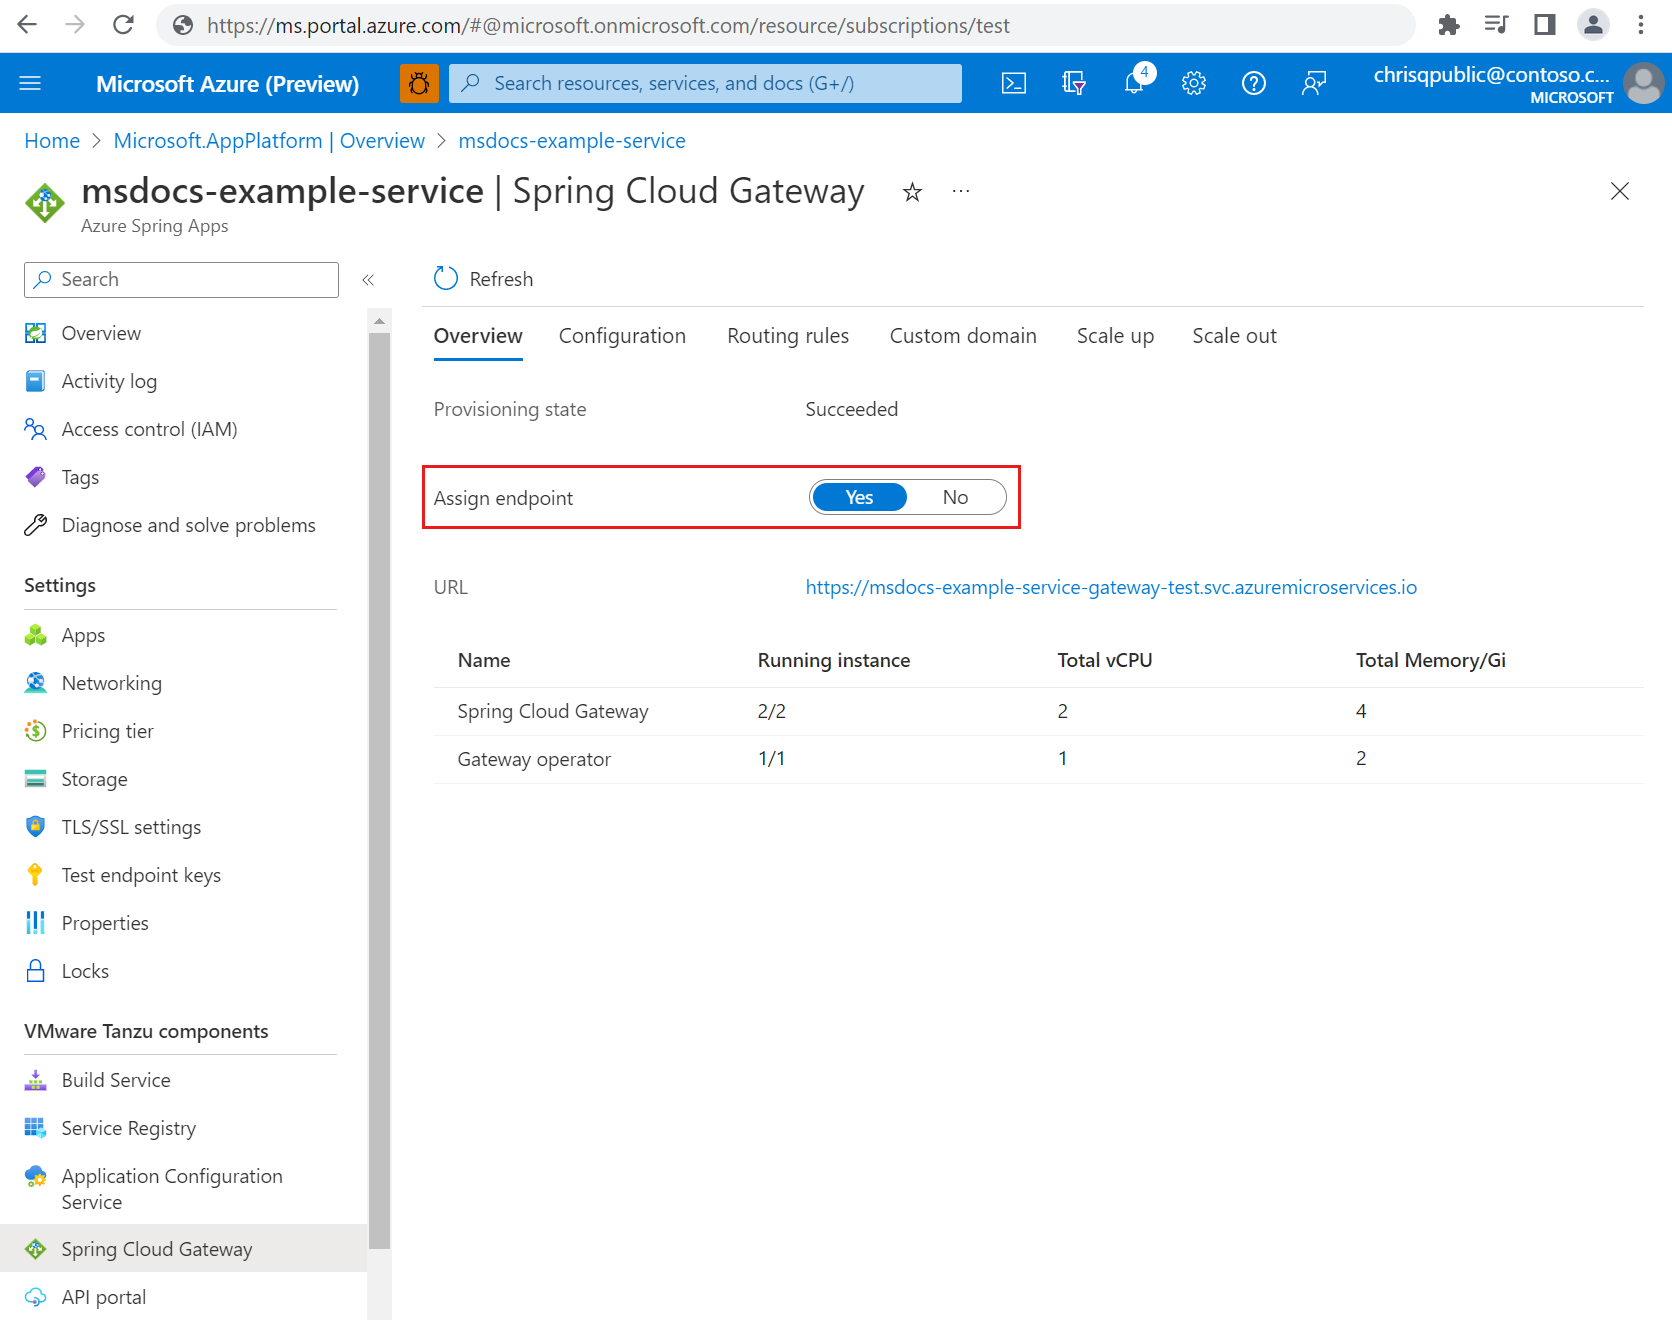 Screenshot of the Azure portal that shows the Spring Cloud Gateway overview page with the toggle for assigning an endpoint.